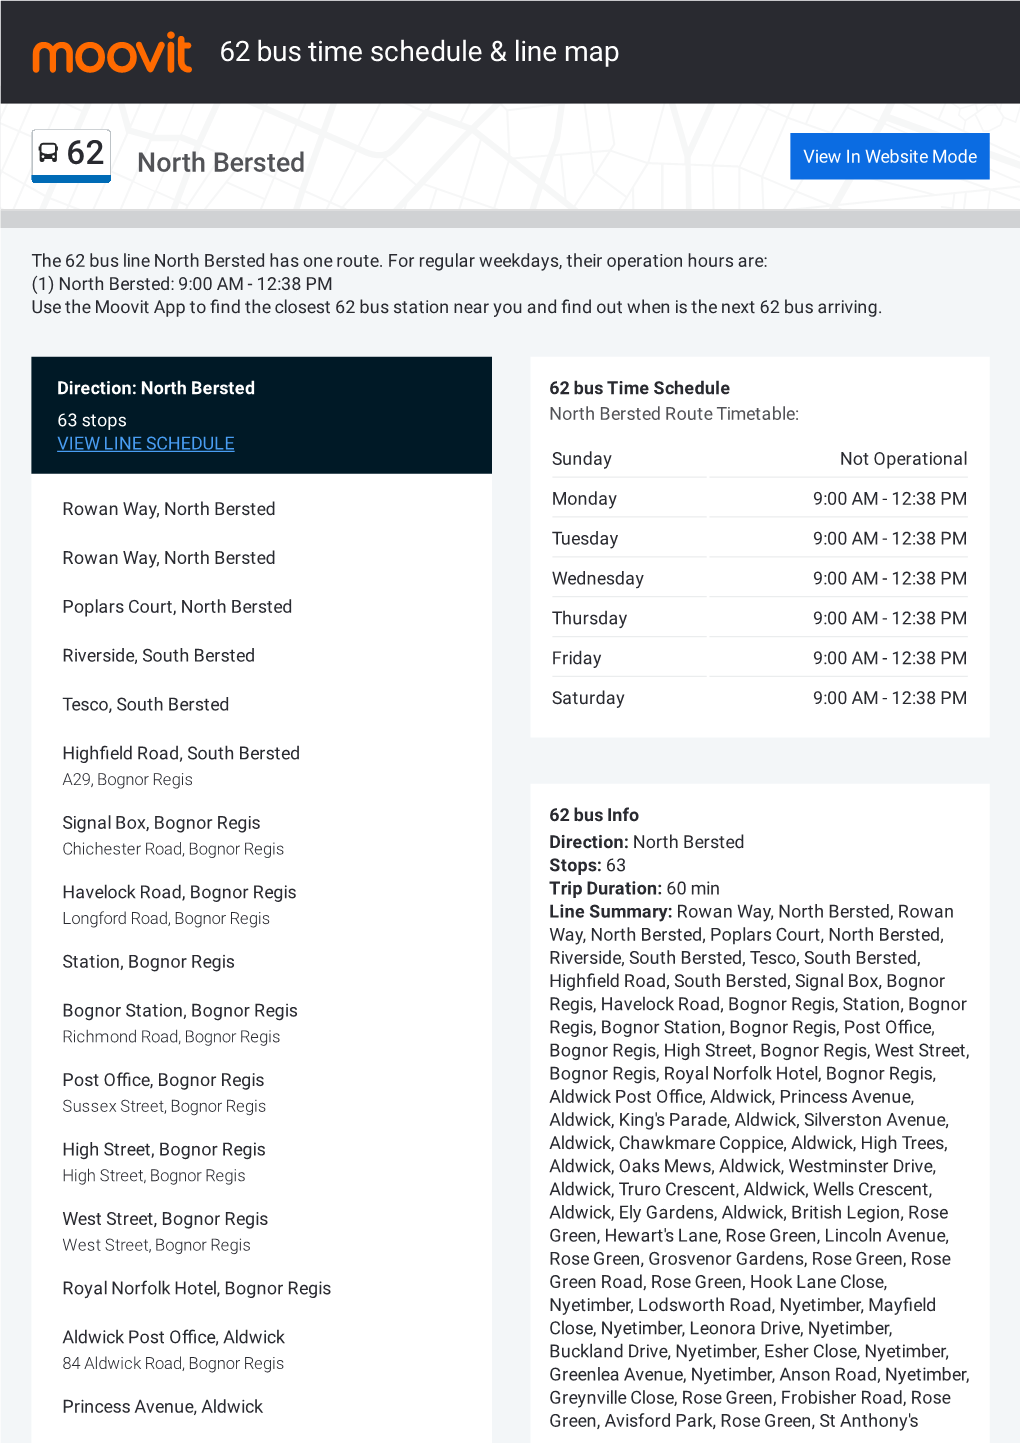 62 Bus Time Schedule & Line Route